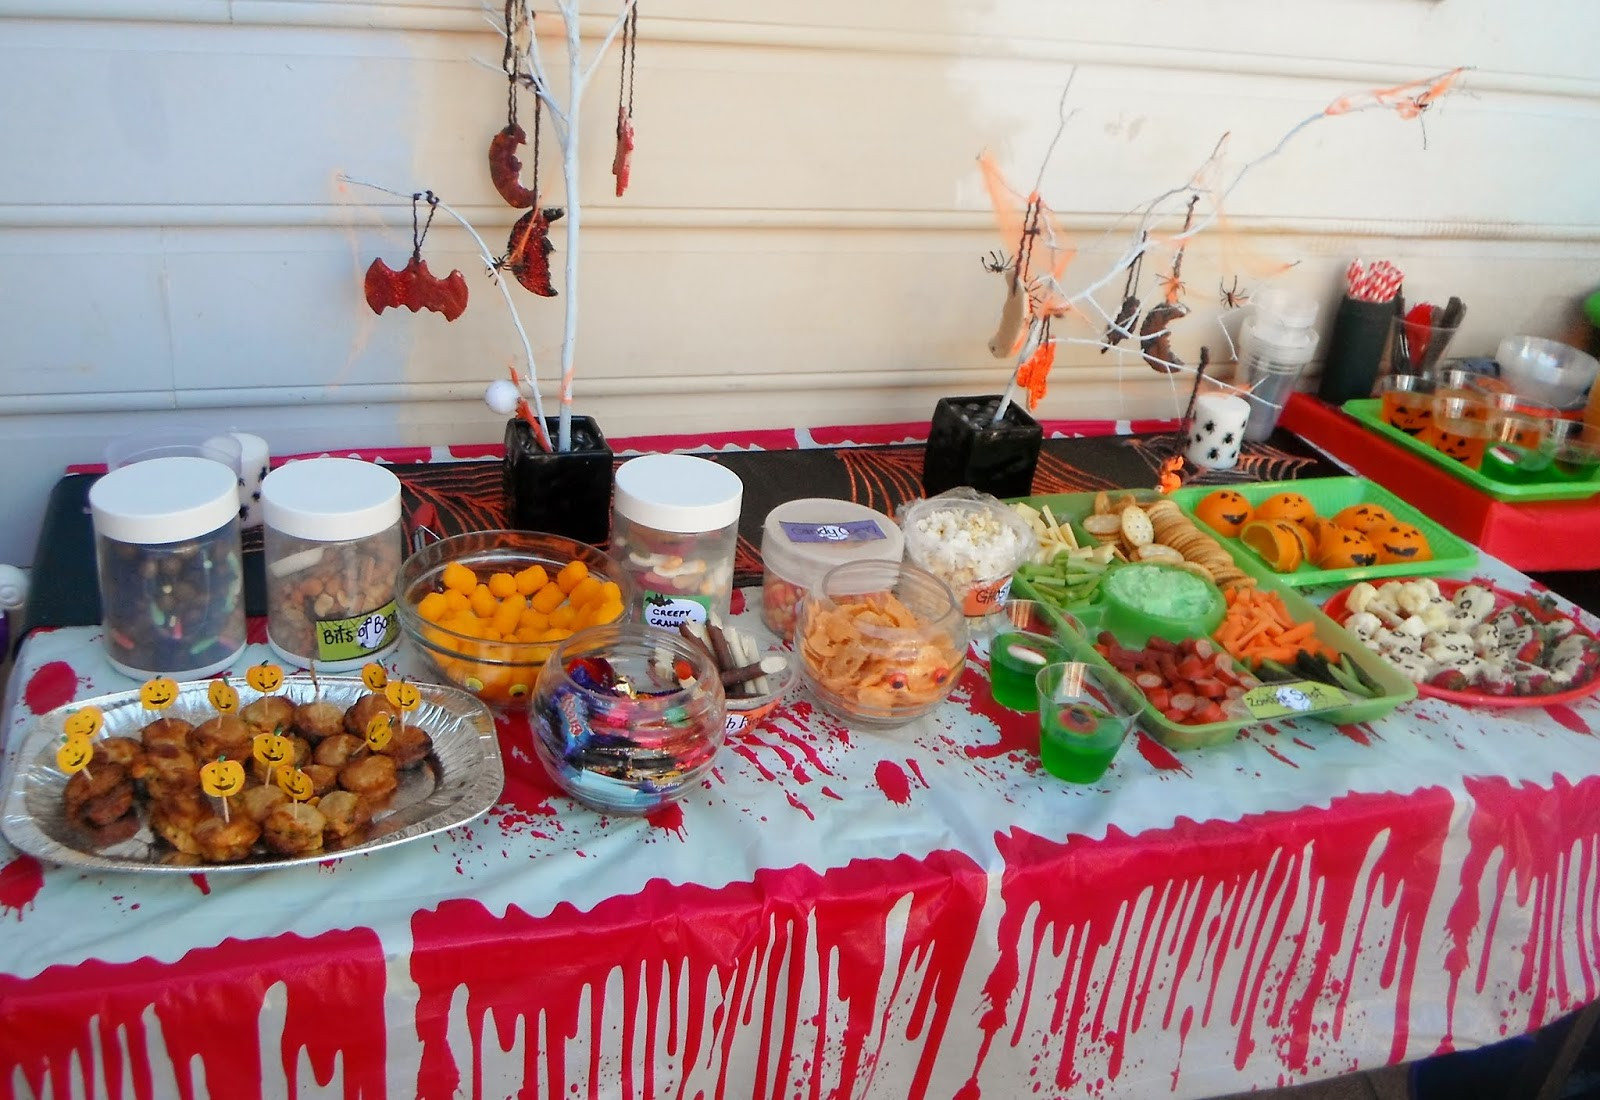 Halloween Kids Party Food
 Adventures at home with Mum Halloween Party Food